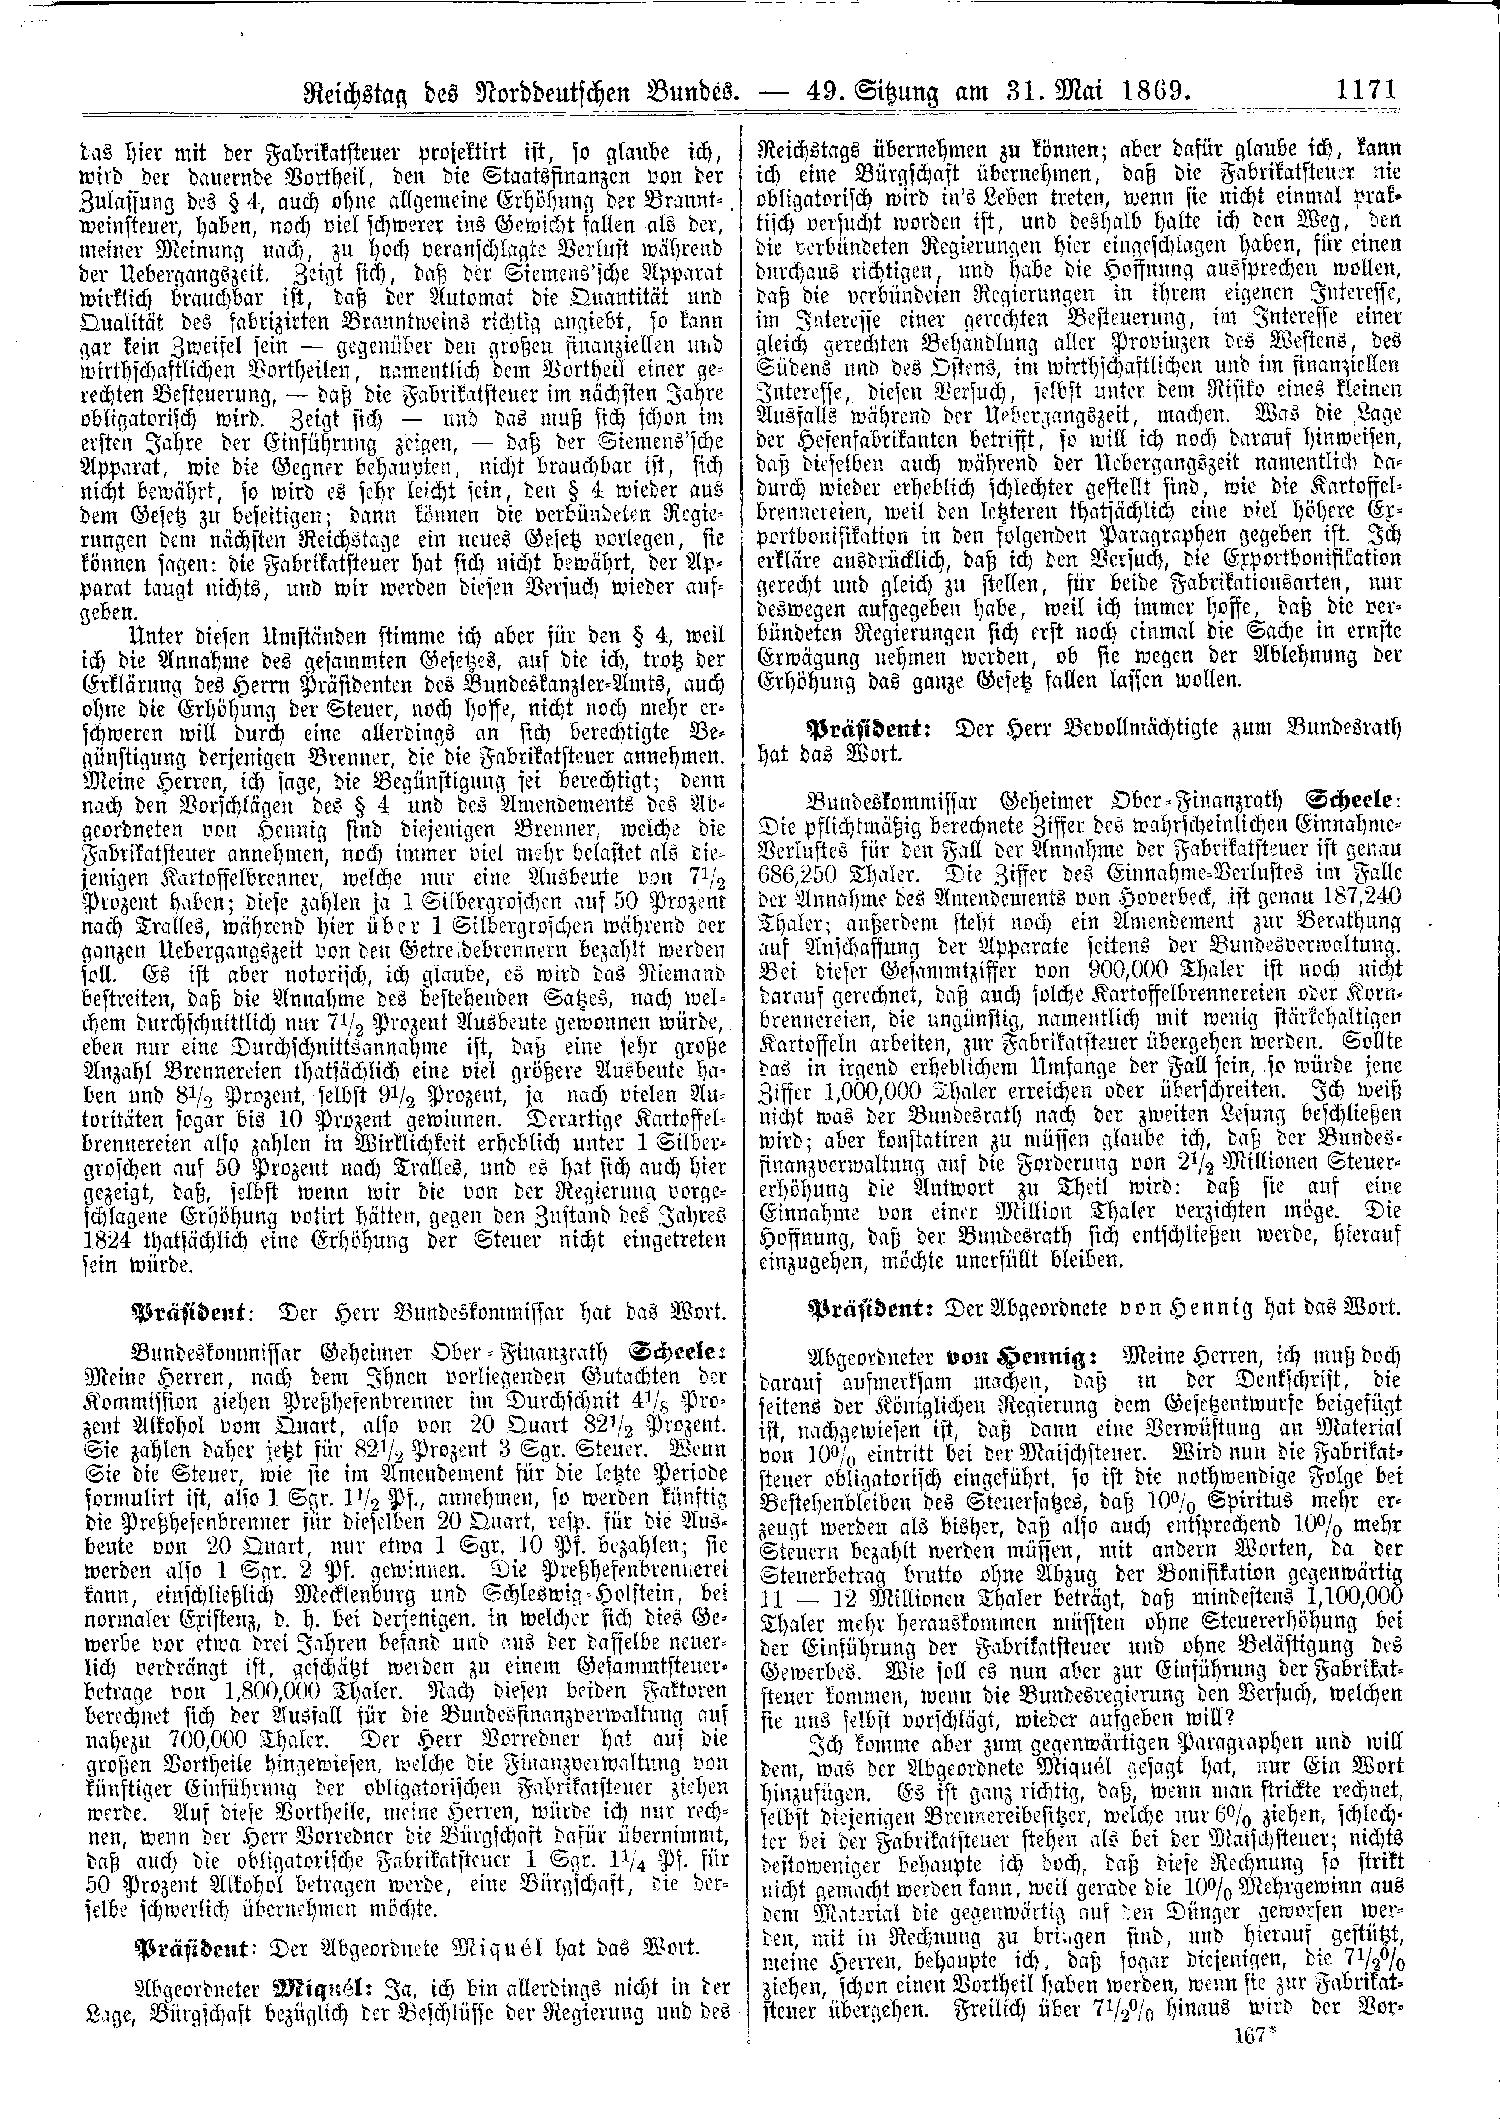 Scan of page 1171